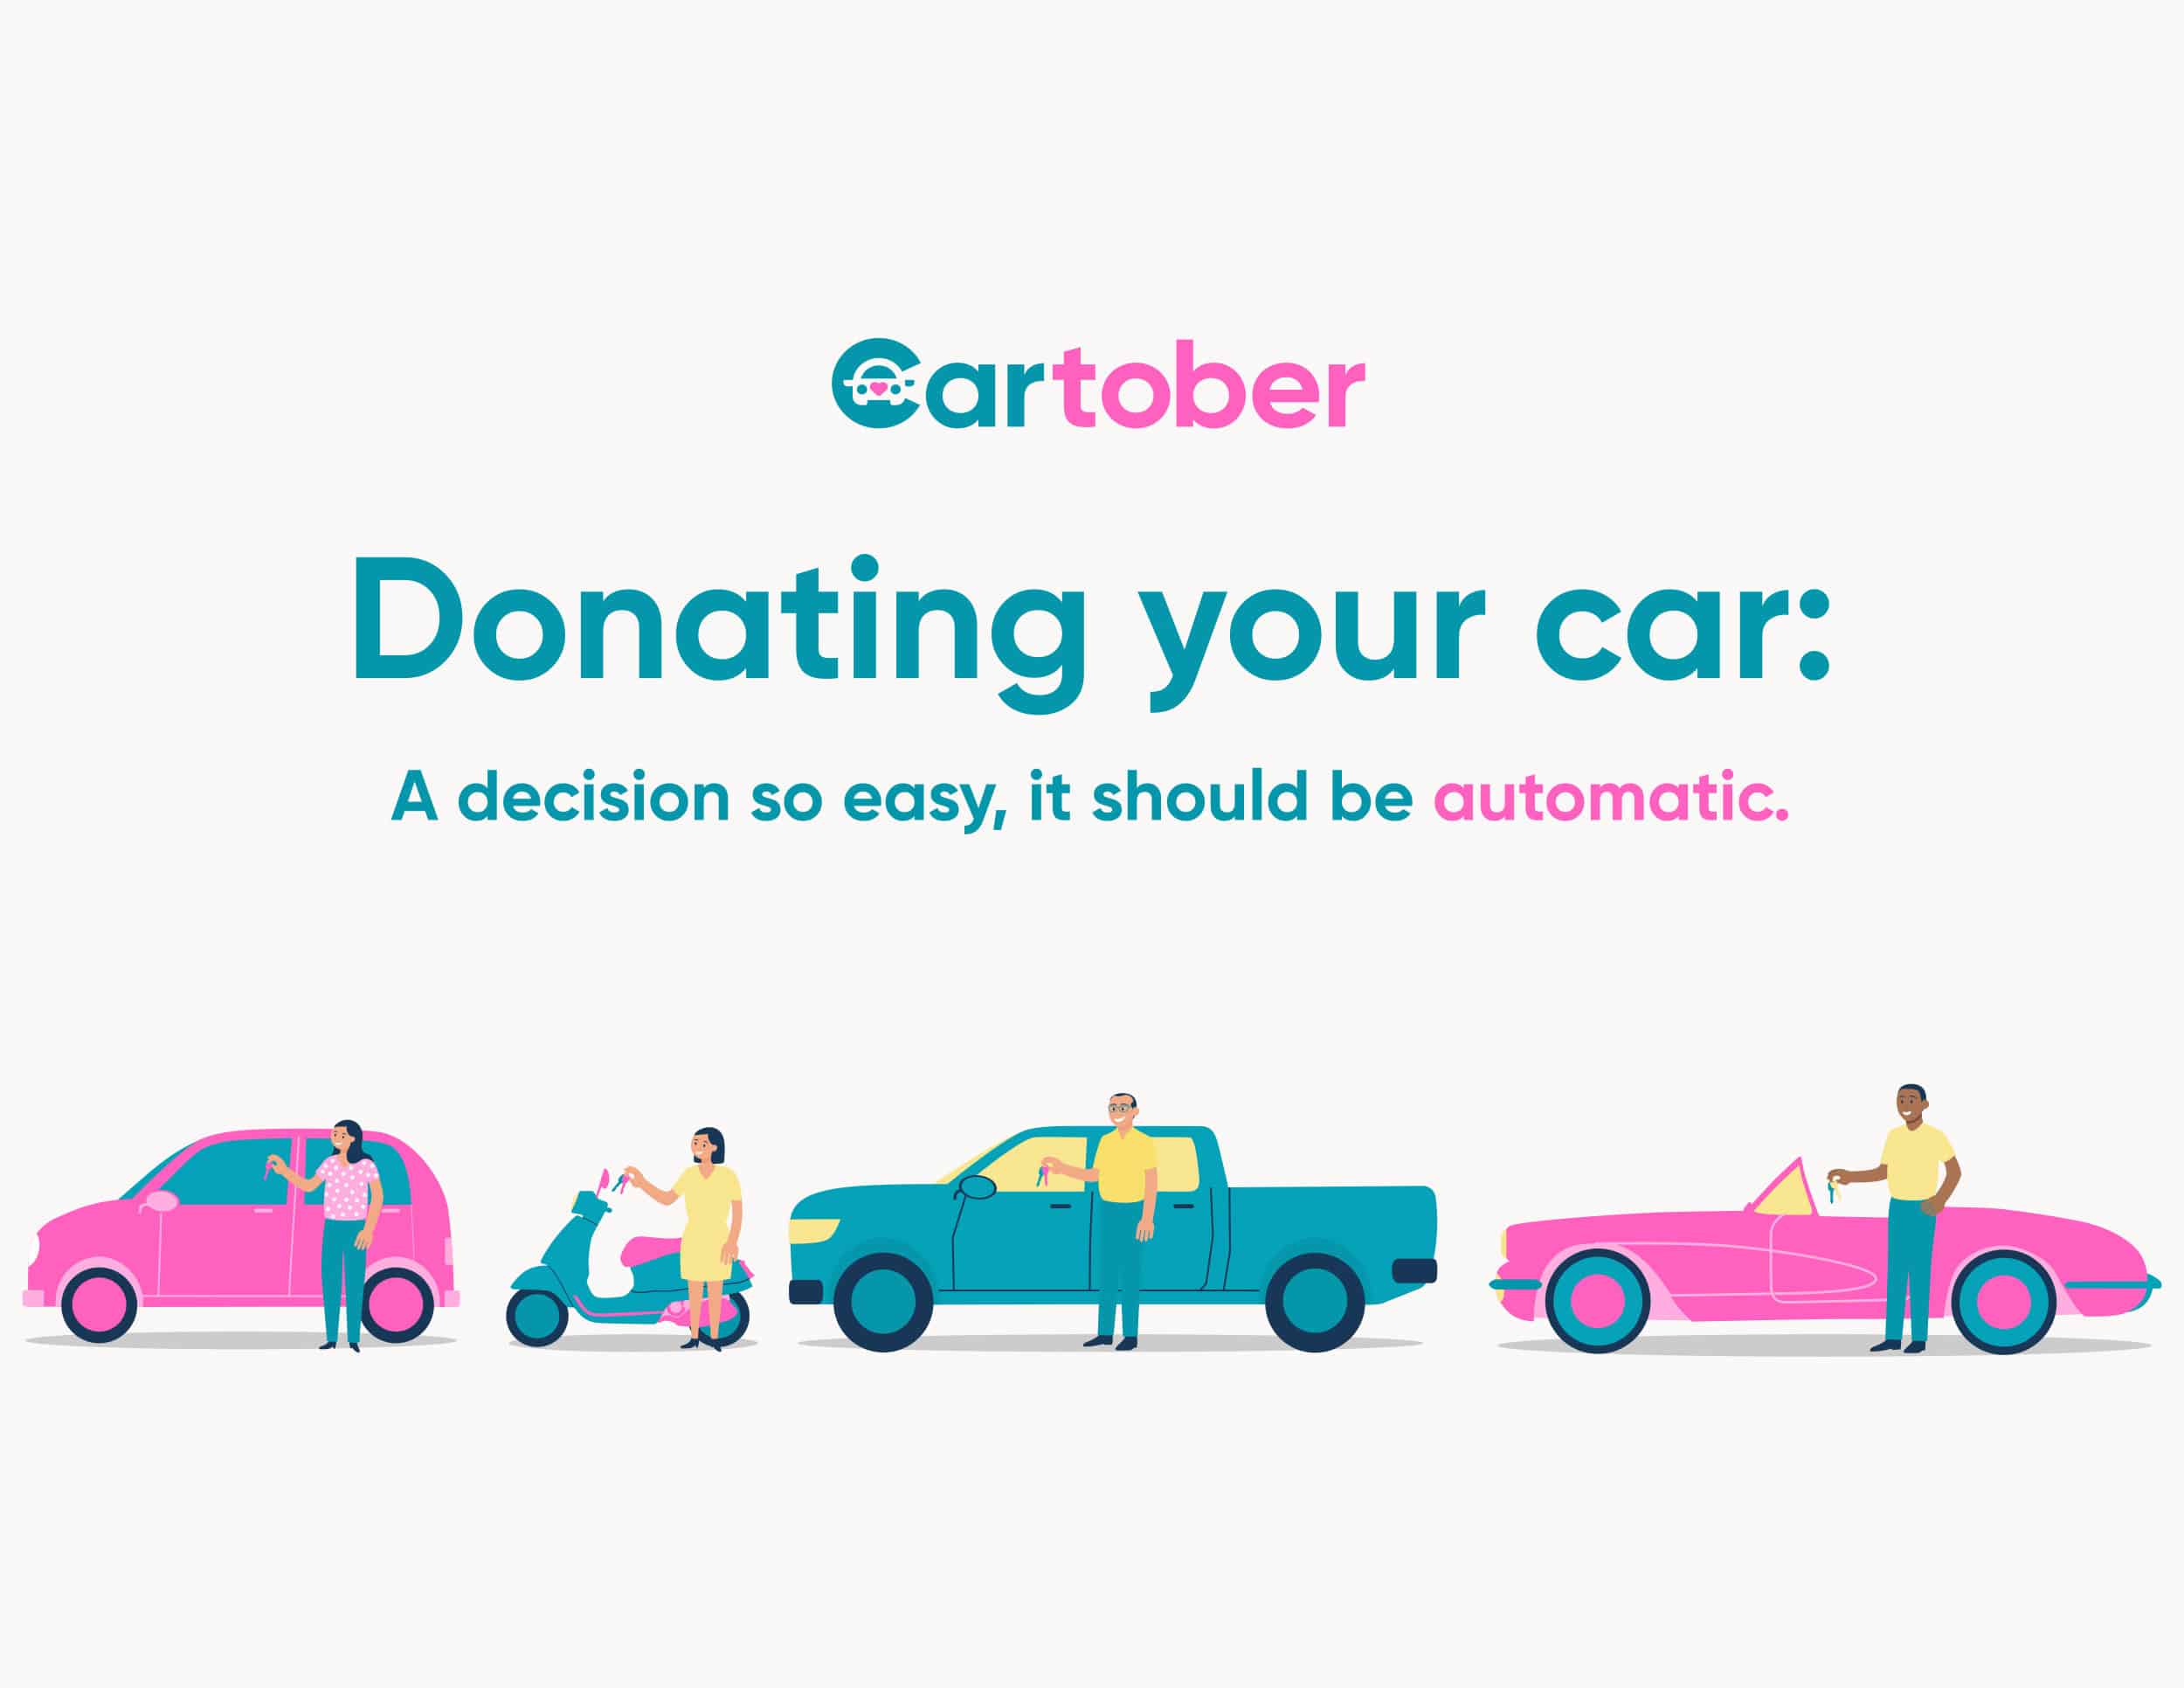 cartoon images of people with their cars and the text Cartober - donating your car, a decision so easy it should be automatic.